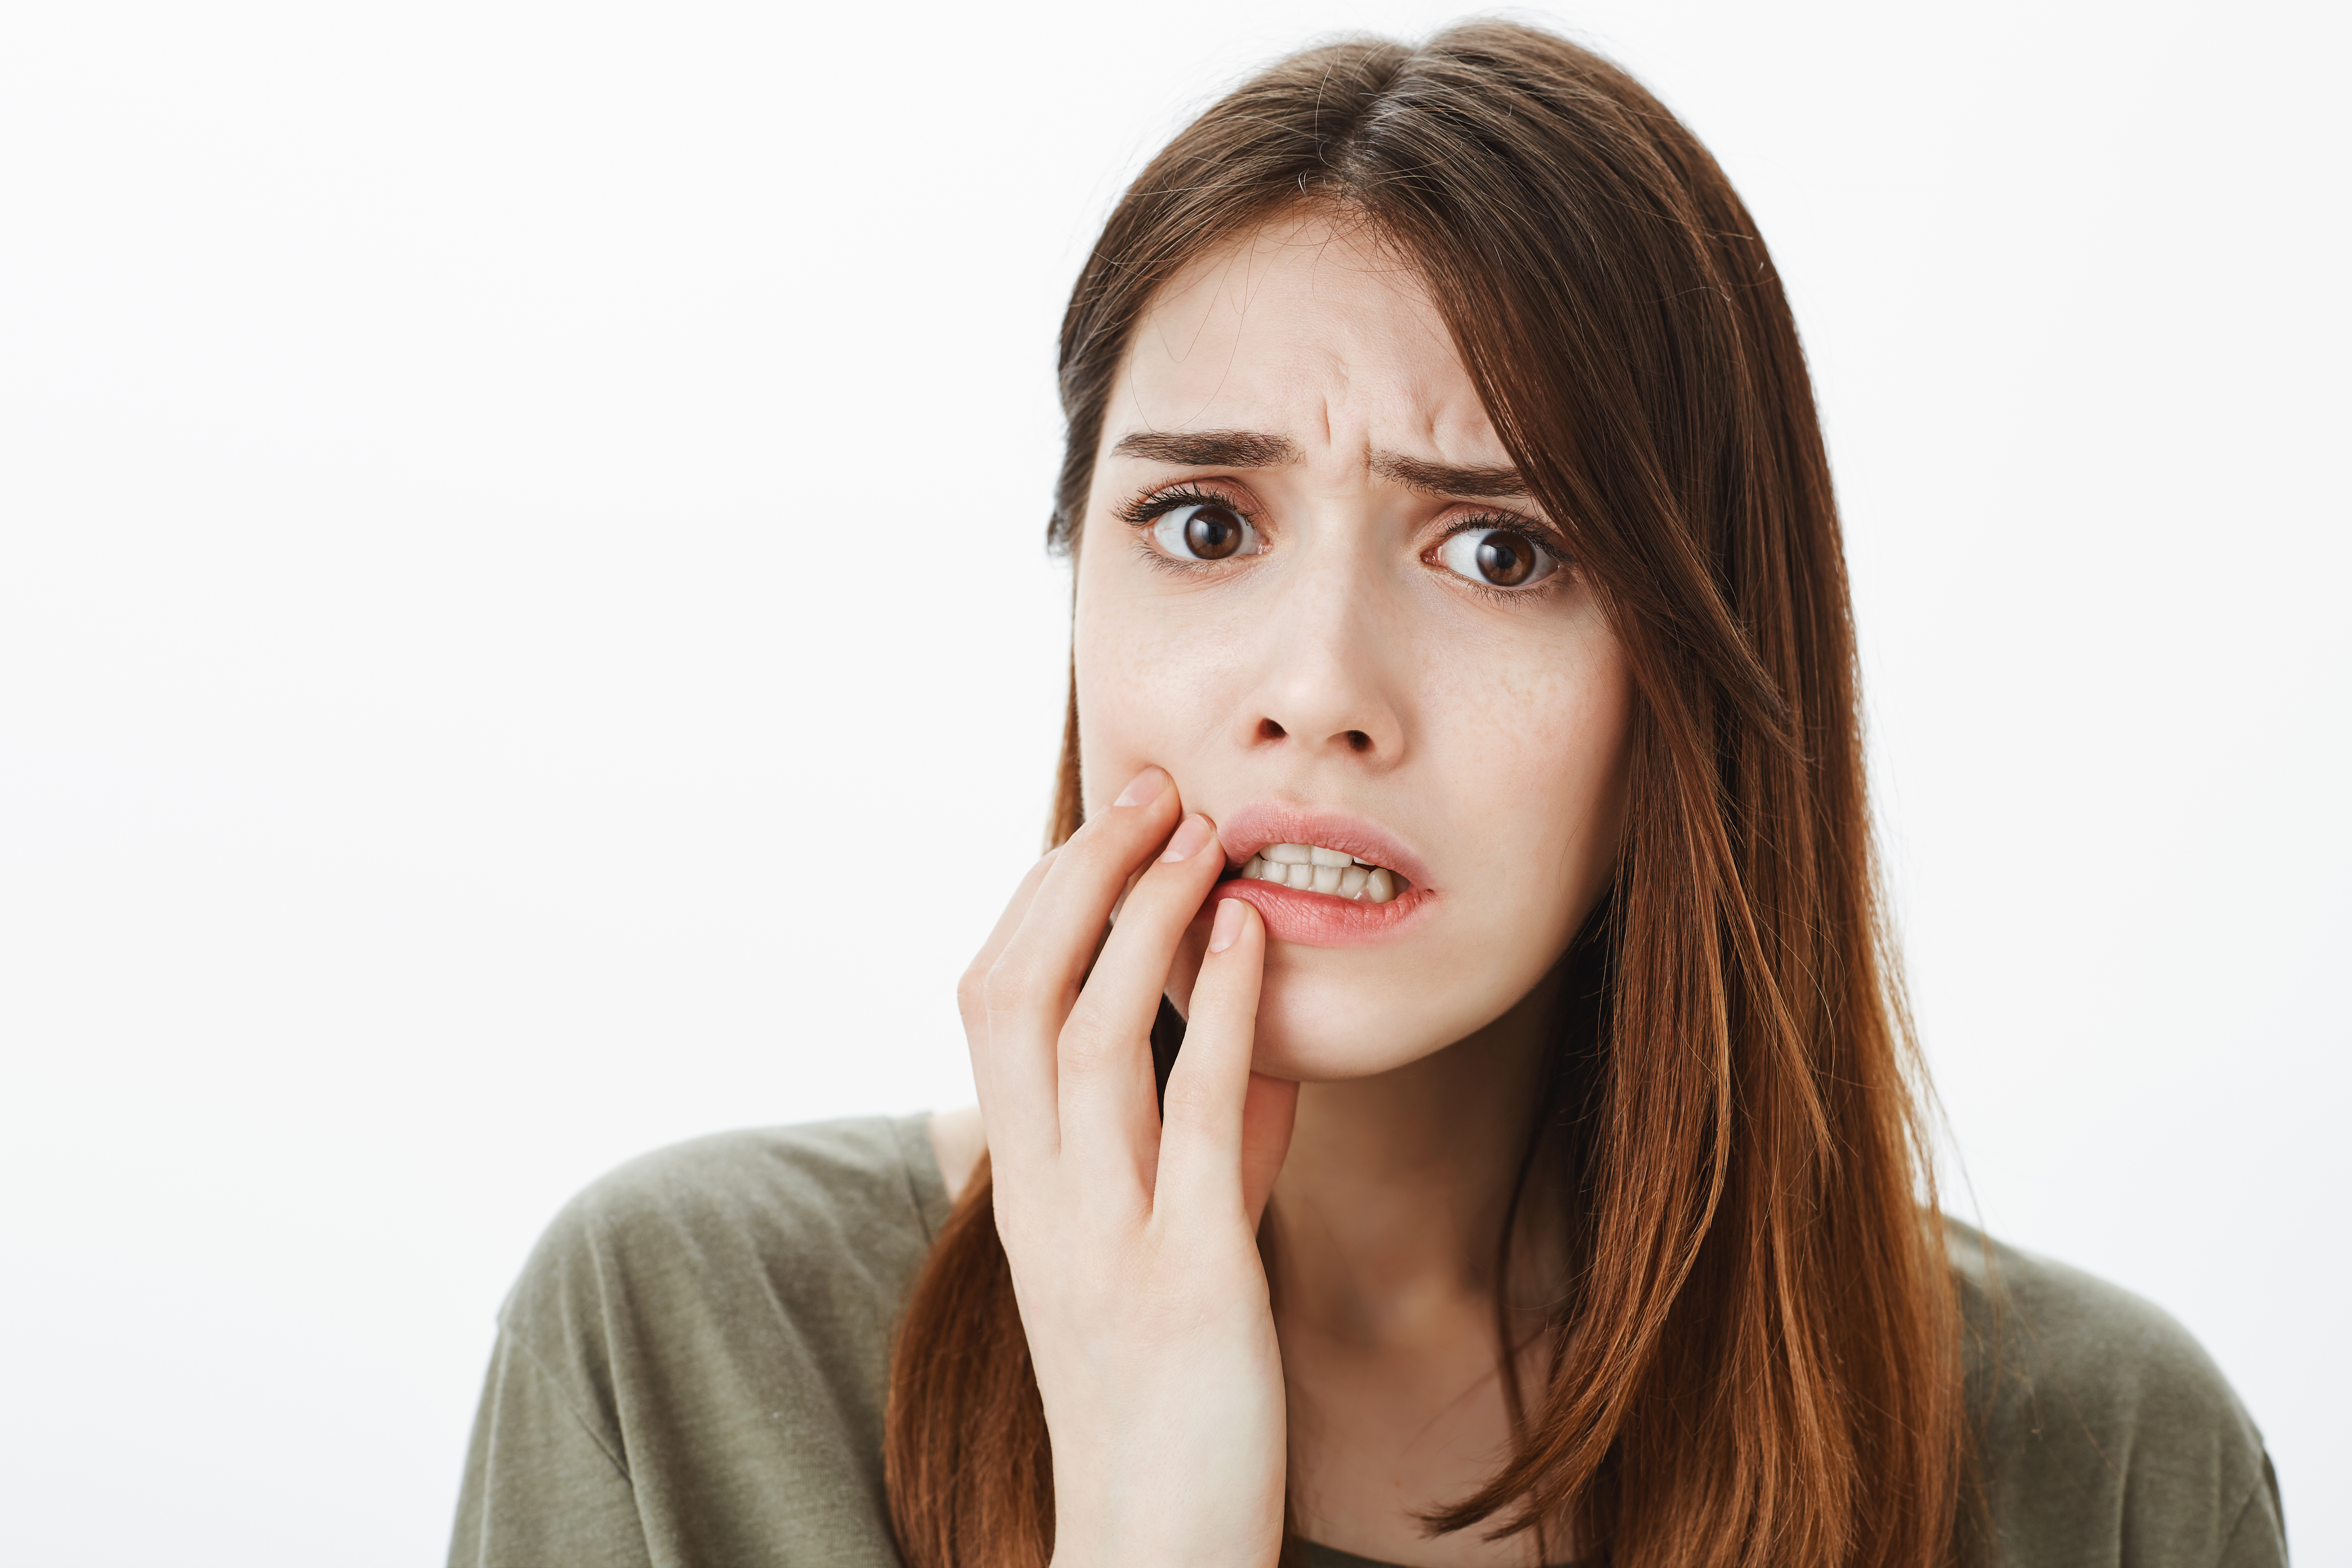 Why Does a Tingling Feeling Occur in the Teeth?